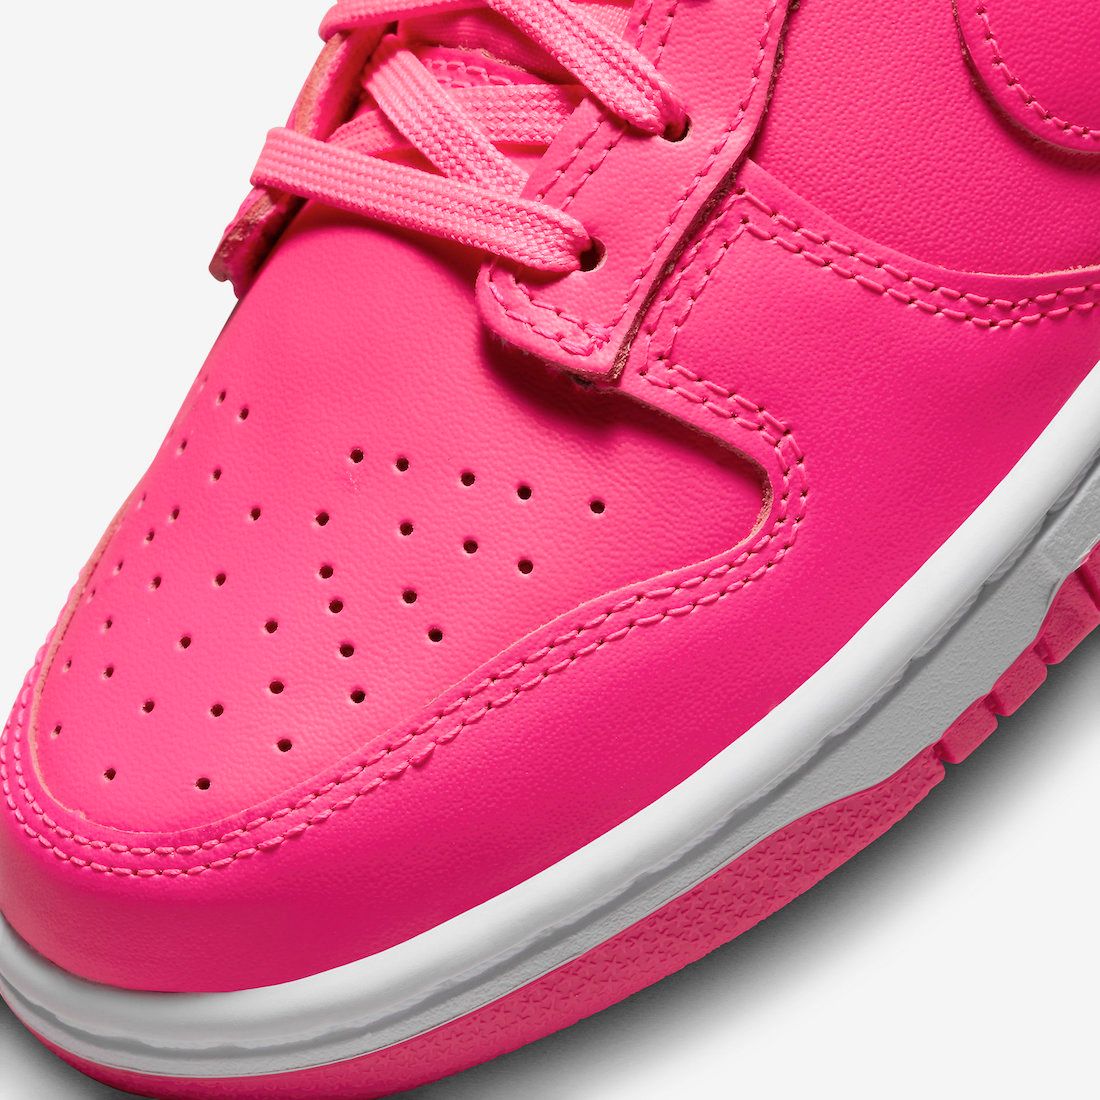 Nike Dunk Low Hot Pink D Z5196 600 Release Date 6